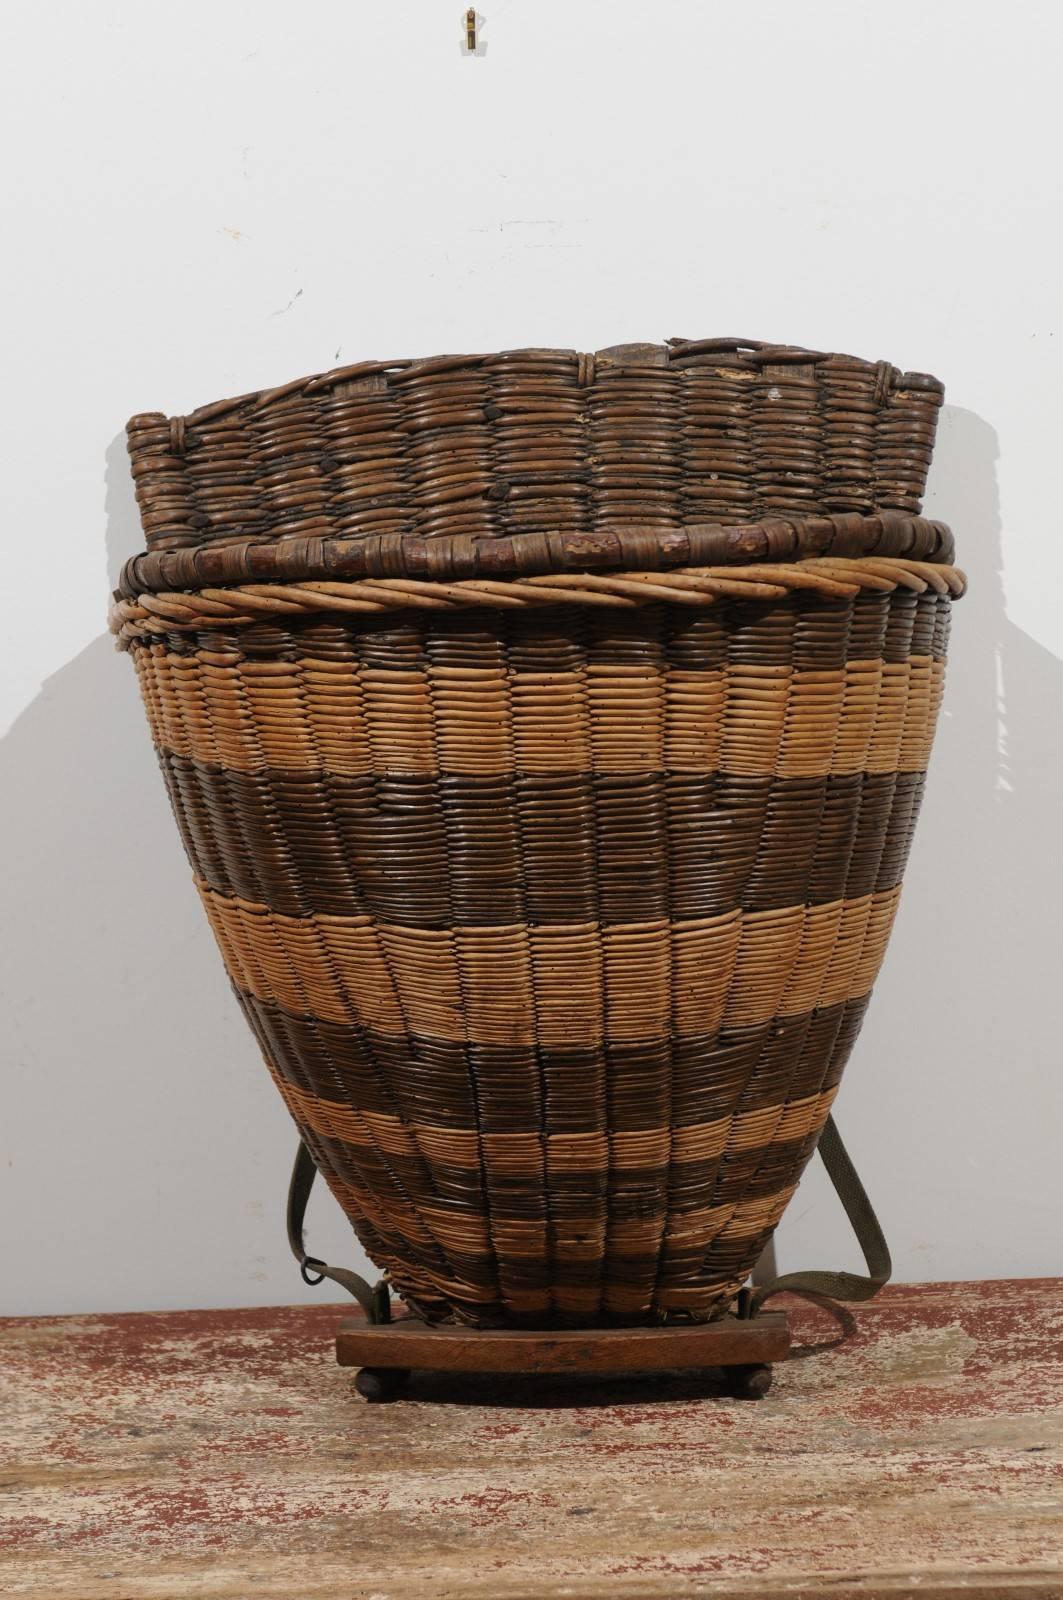 A French 19th century small wicker grape harvesting basket from the Burgundy town of Chablis. This two-toned harvesters basket features its two leather straps, used to help the workers carry it on their back and allowing them to pick up the grapes